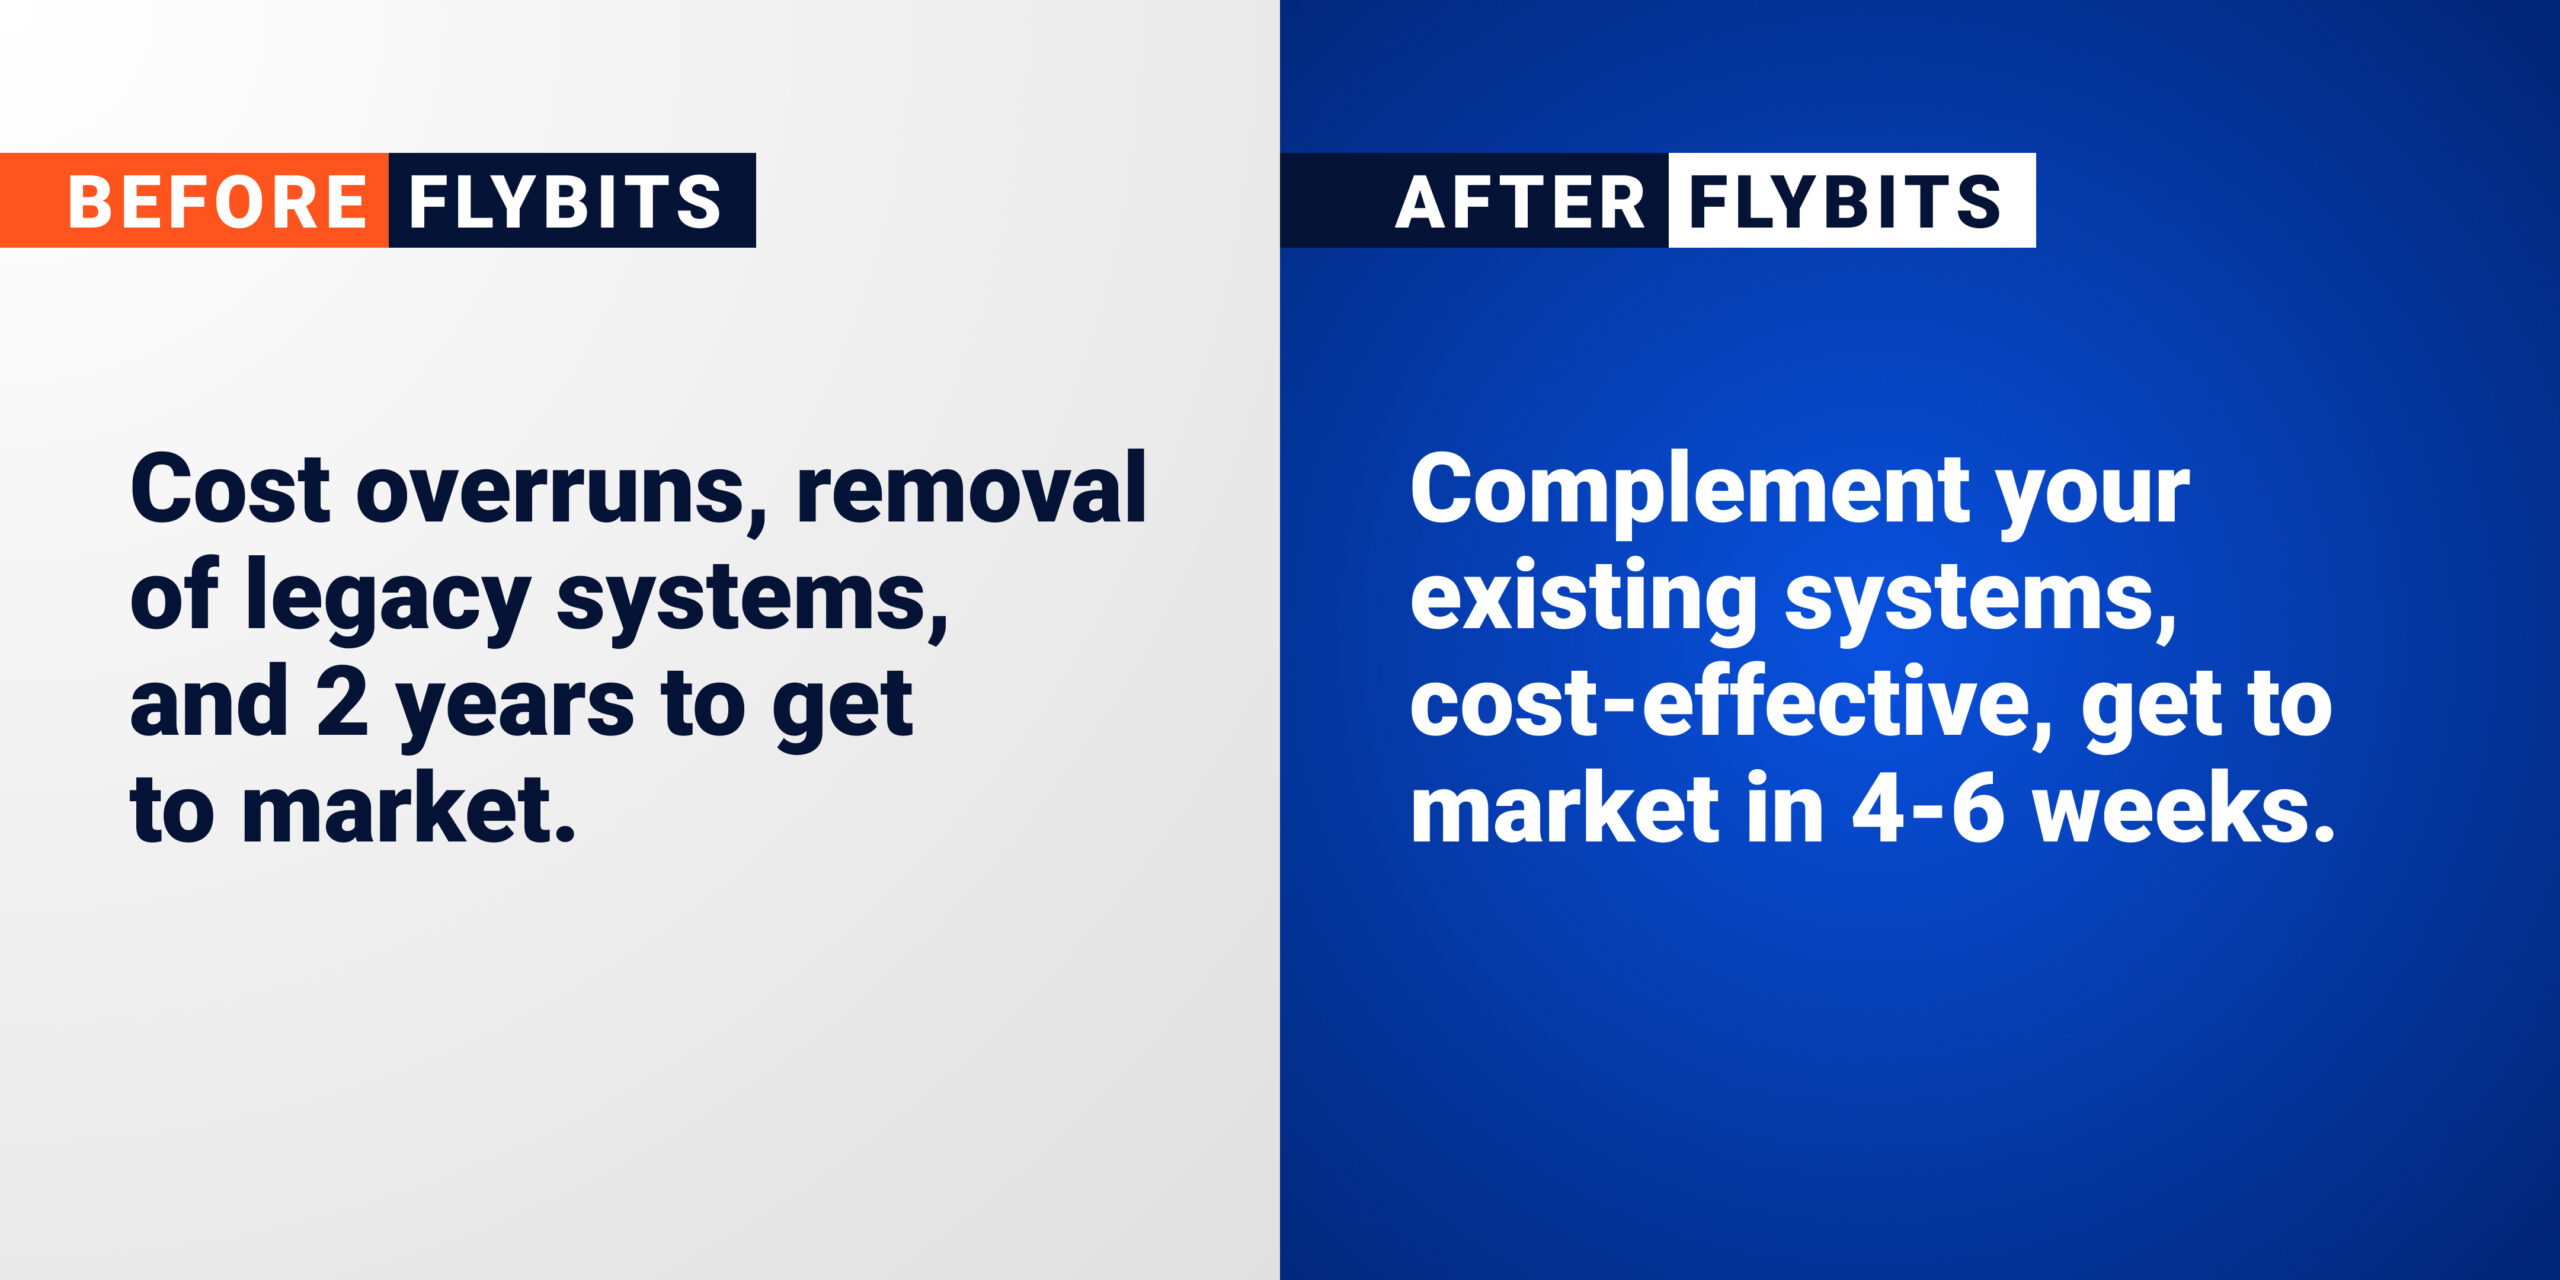 Before Flybits: Cost overruns, removal of legacy systems, and 2 years to get to market. After Flybits: Complement your existing systems, cost-effective, get to market in 4-6 weeks.